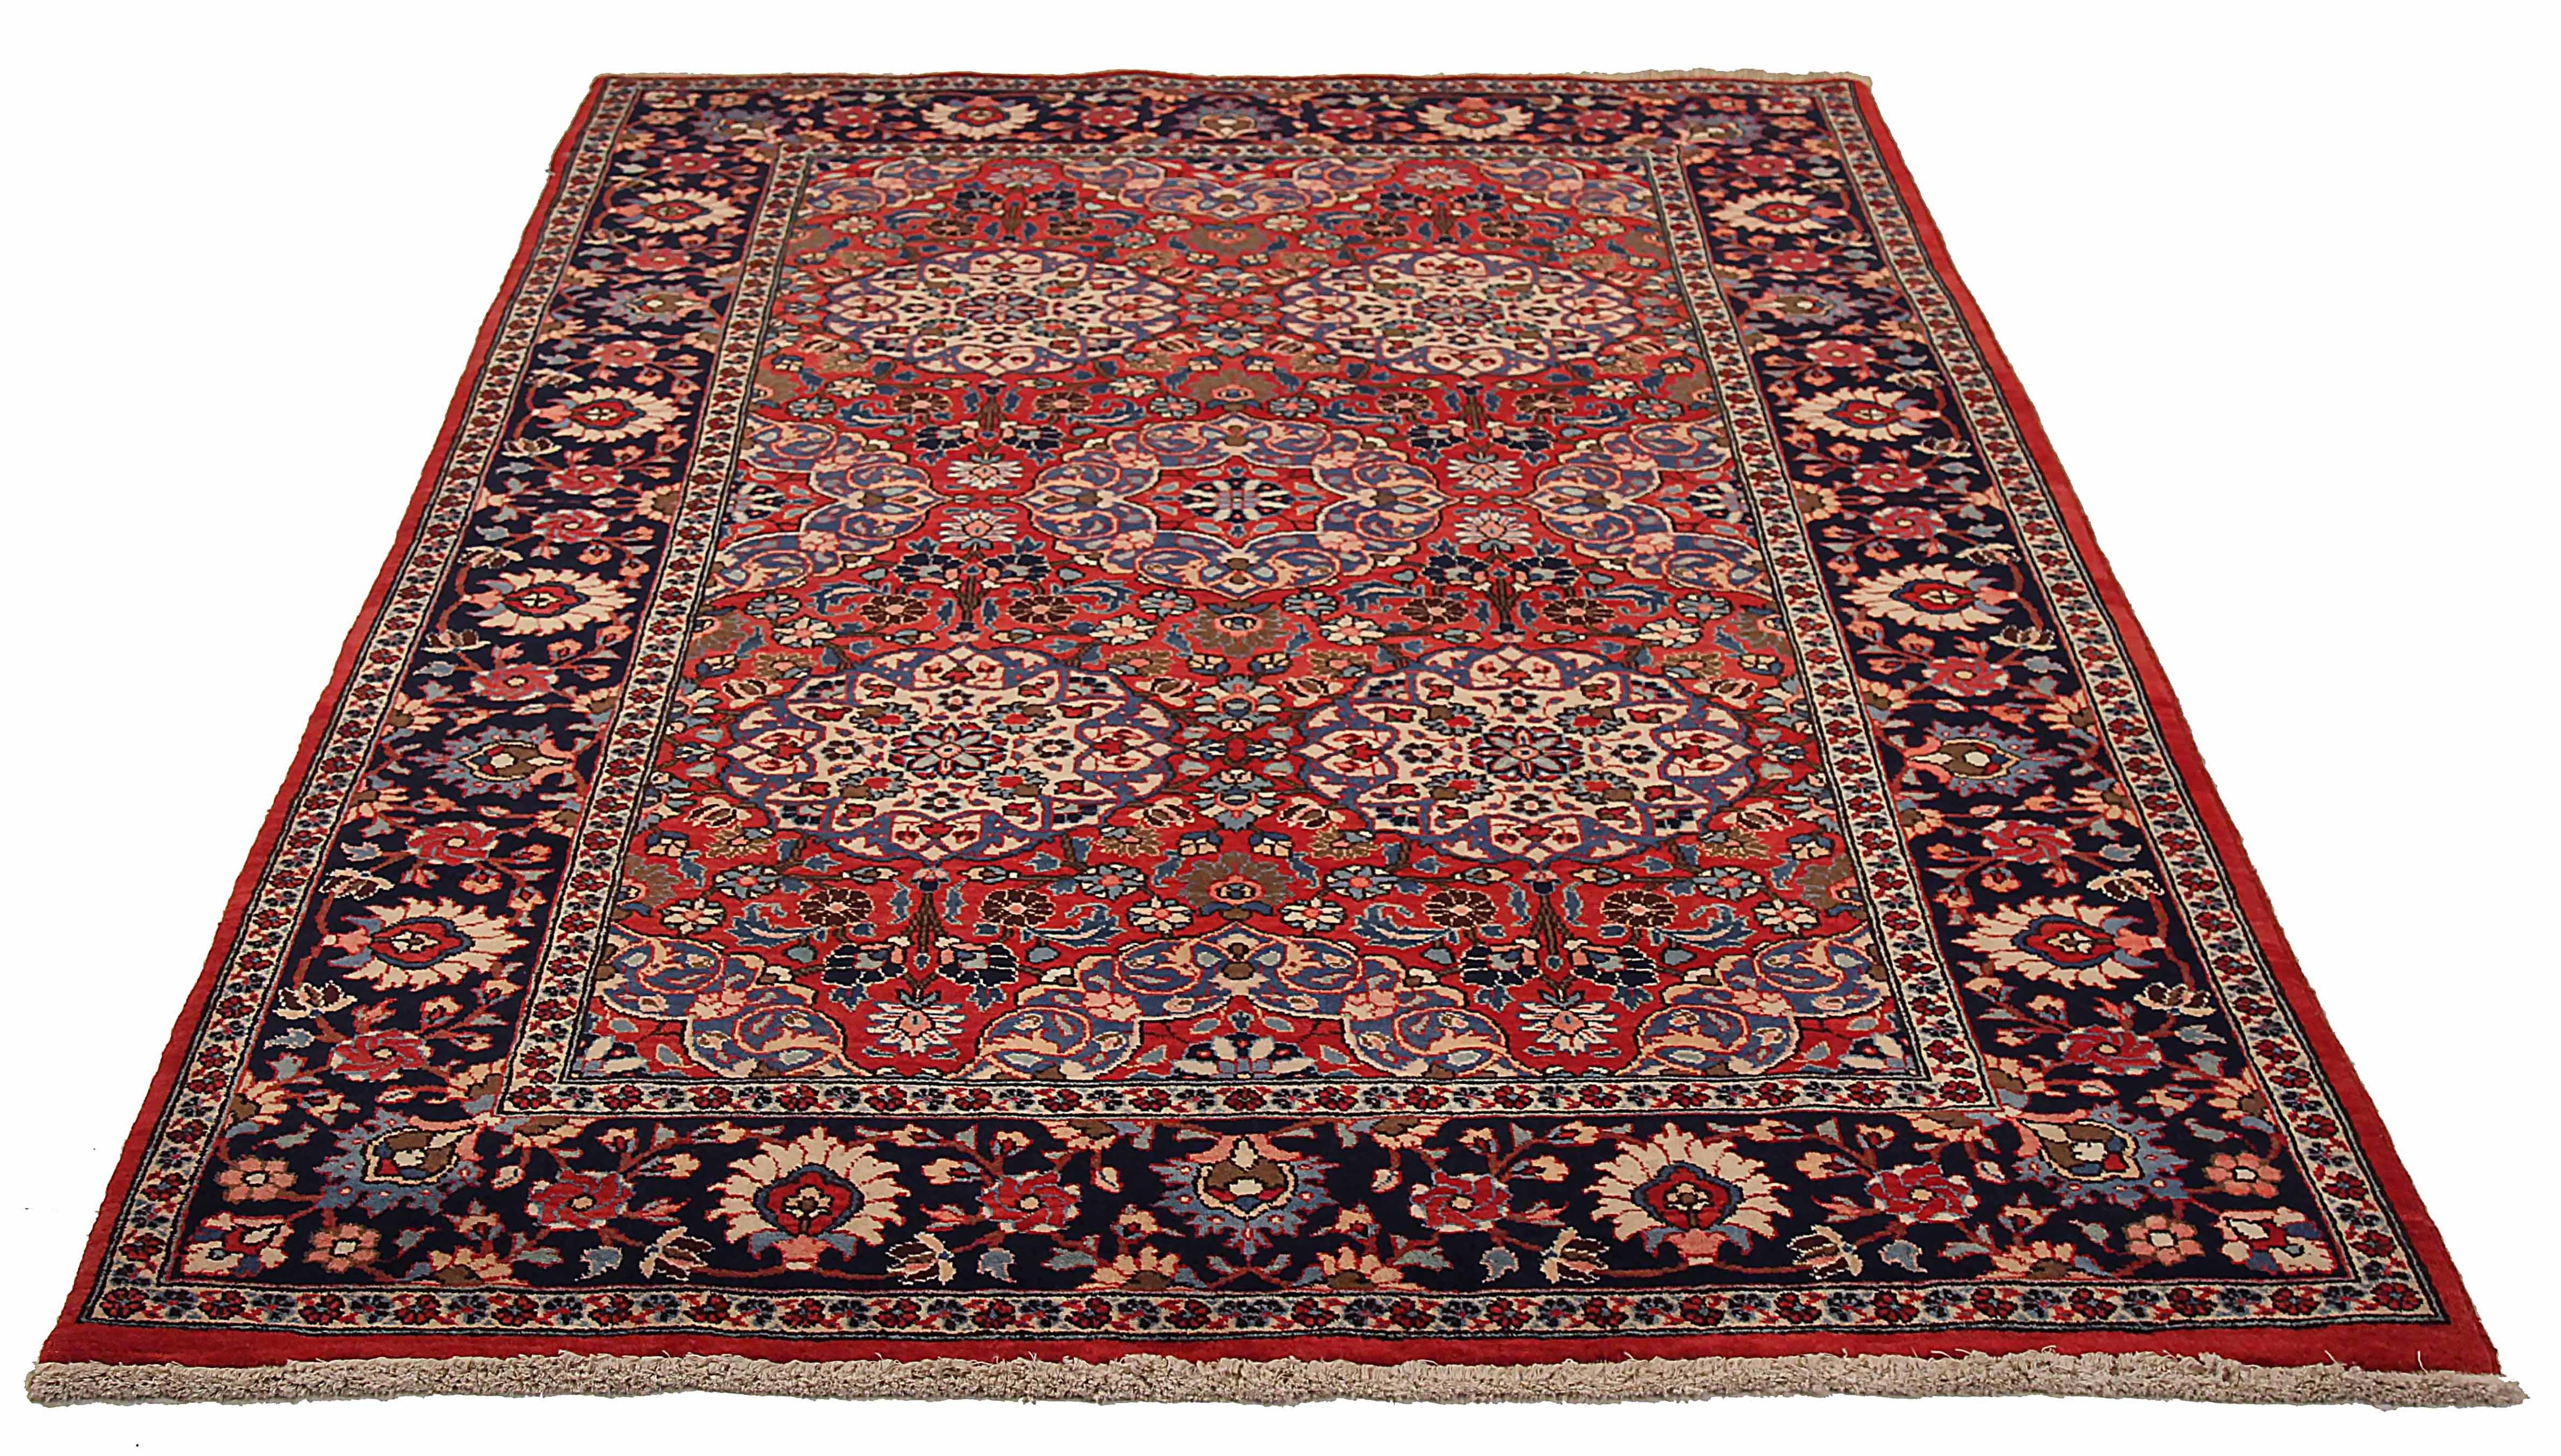 Antique Persian area rug handwoven from the finest sheep’s wool. It’s colored with all-natural vegetable dyes that are safe for humans and pets. It’s a traditional Semnan design handwoven by expert artisans. It’s a lovely area rug that can be